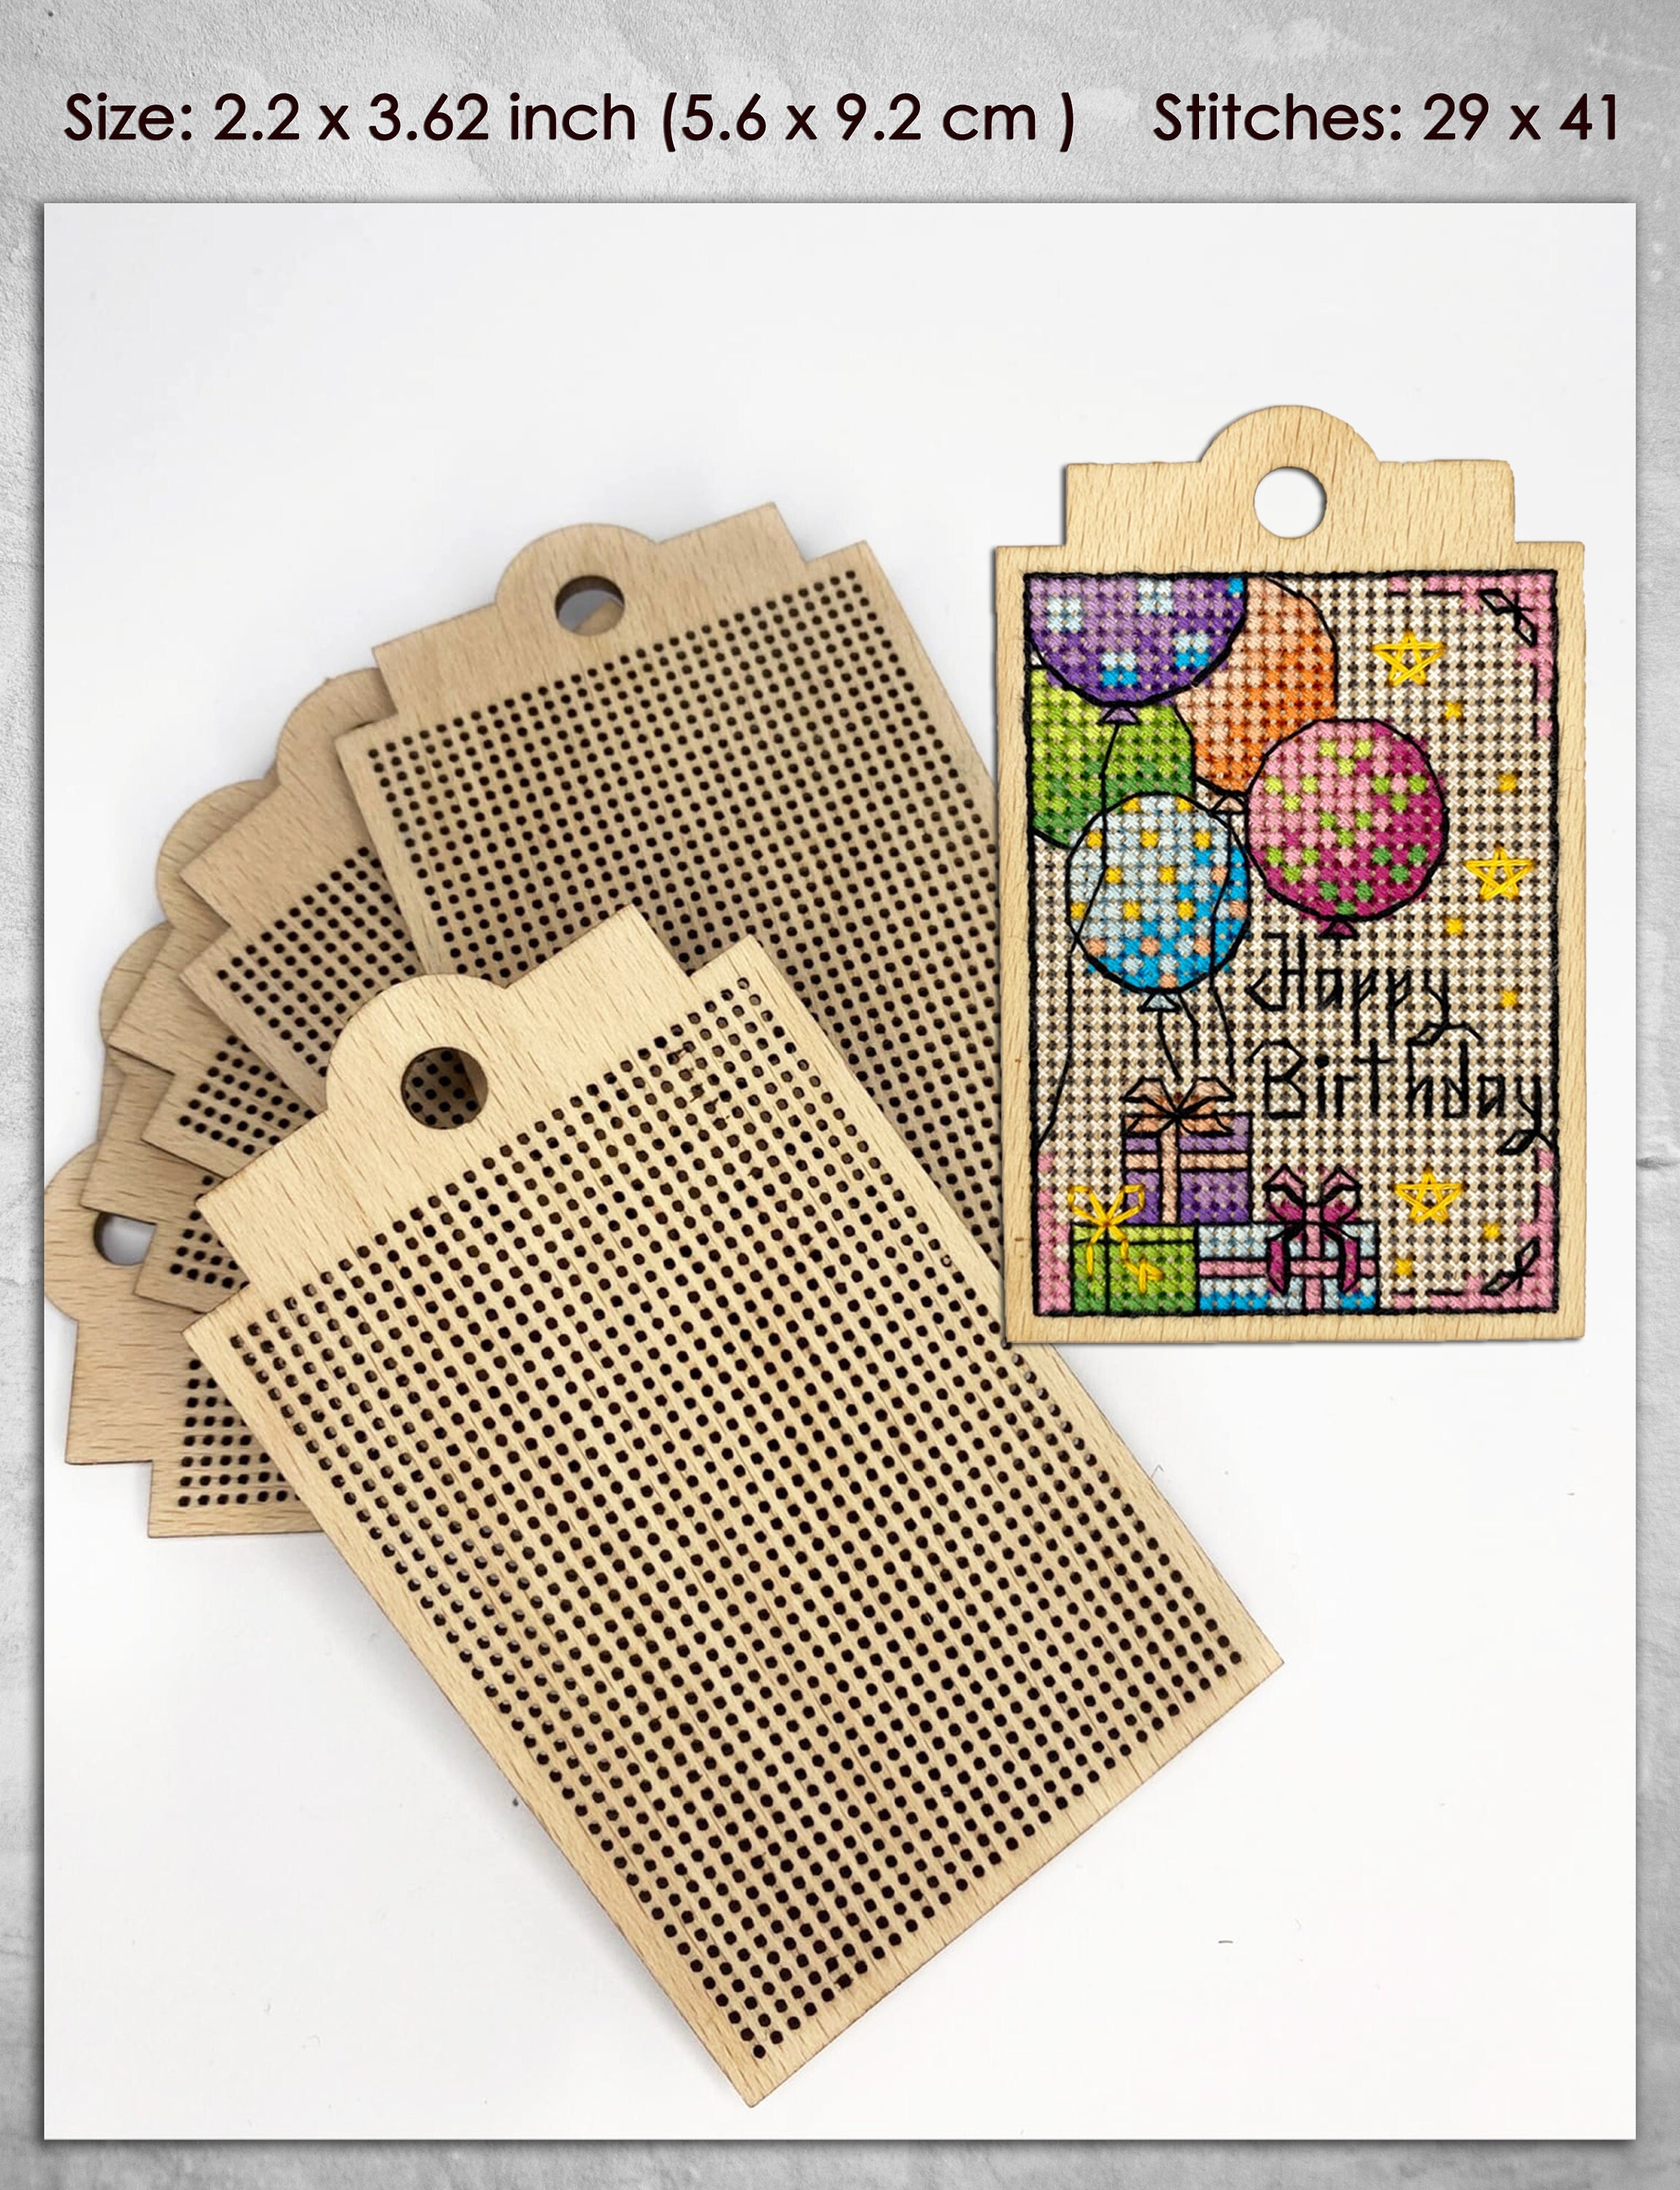 The ultimate guide to plastic canvas for cross stitch + free project -  Gathered